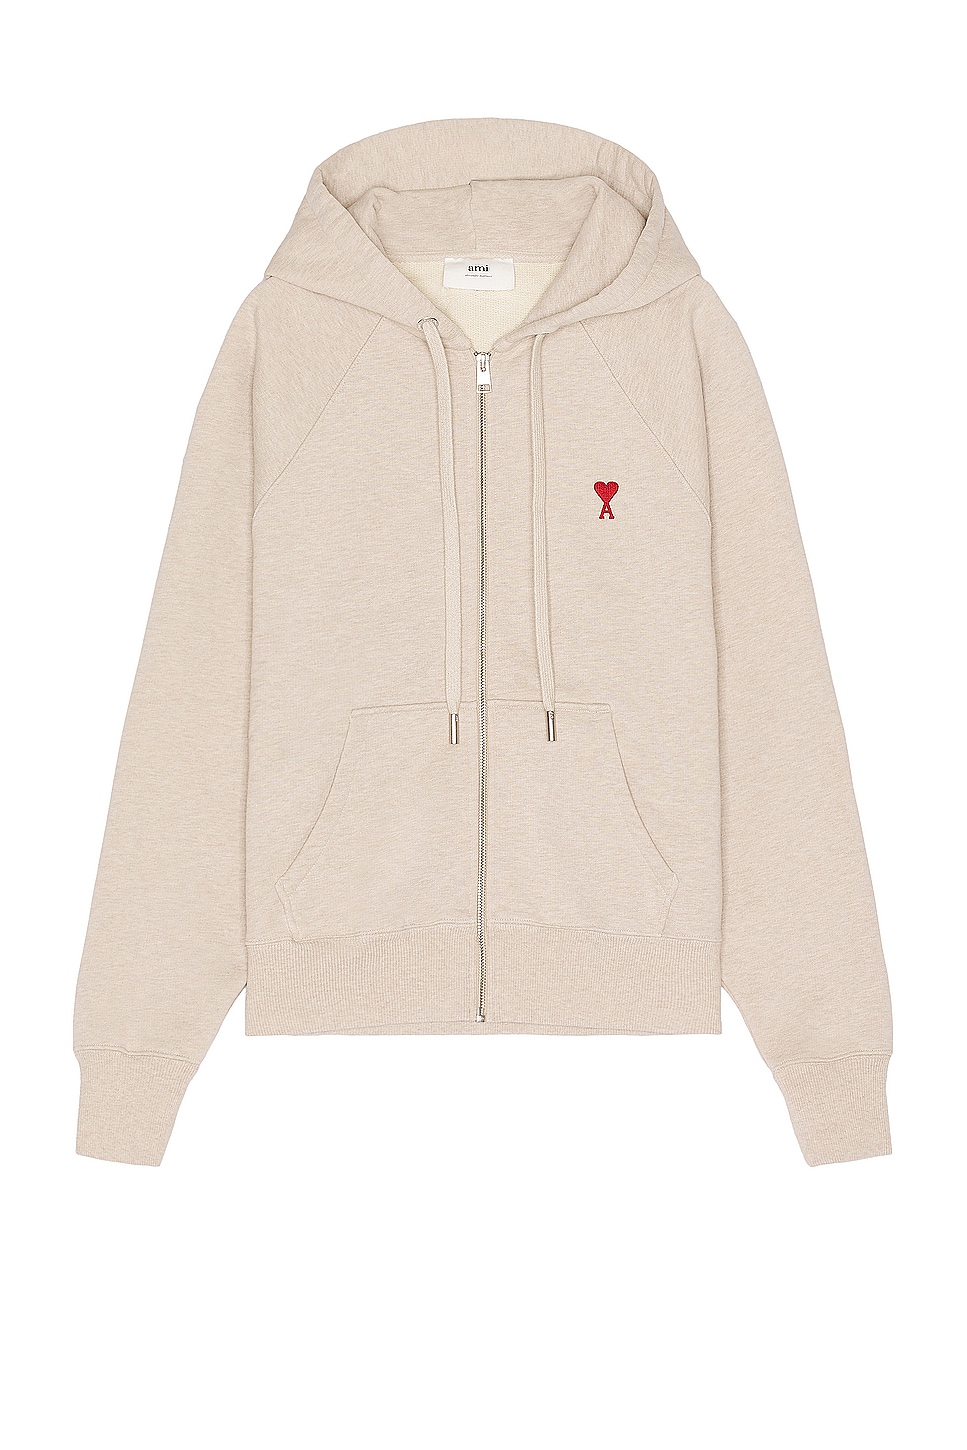 Image 1 of ami ADC Zipped Hoodie in Heather Light Beige